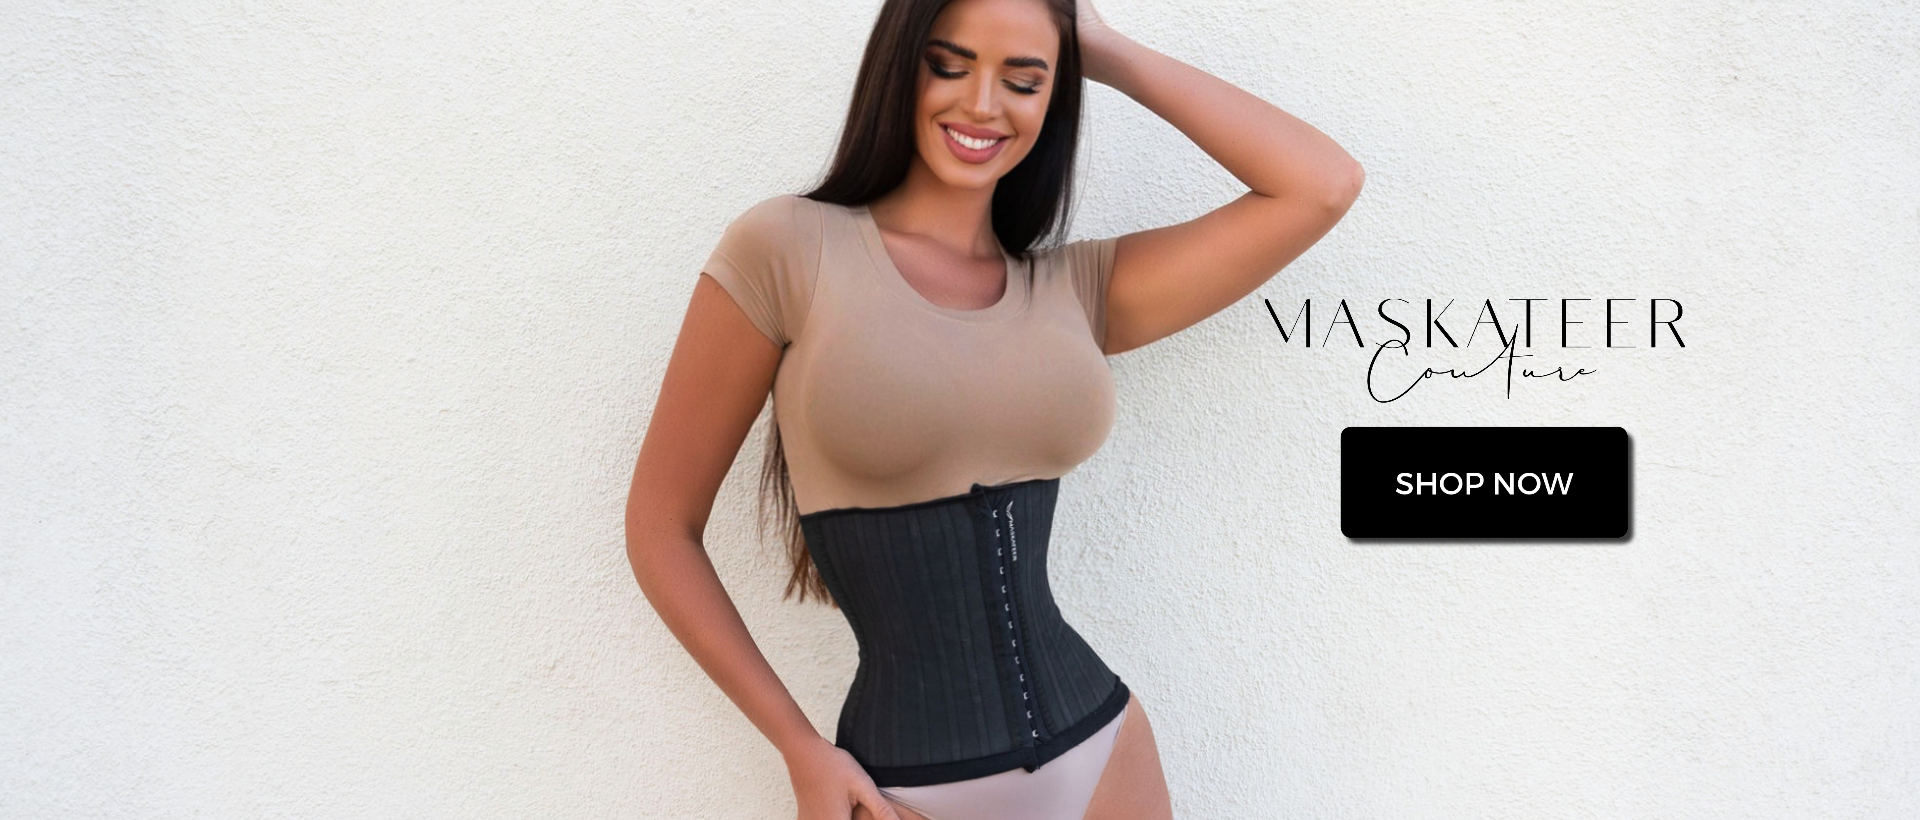 Transform Your Curves with our Premium Waist Trainers and Fitness